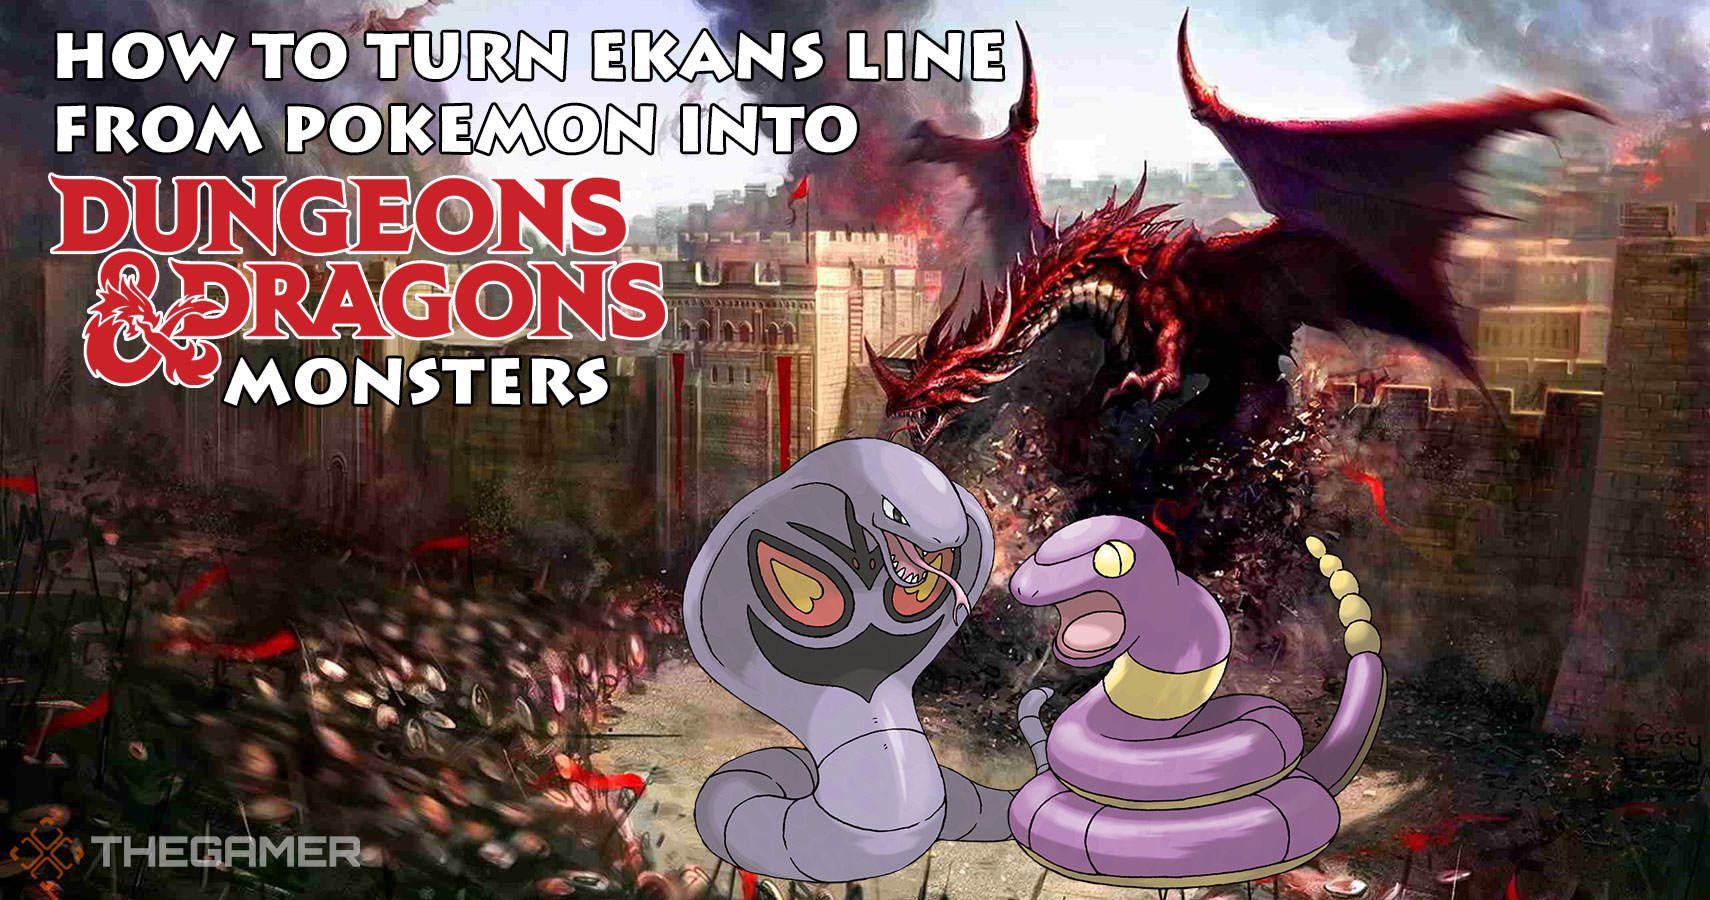 How To Turn The Ekans Line From Pokemon Into D&D Monsters